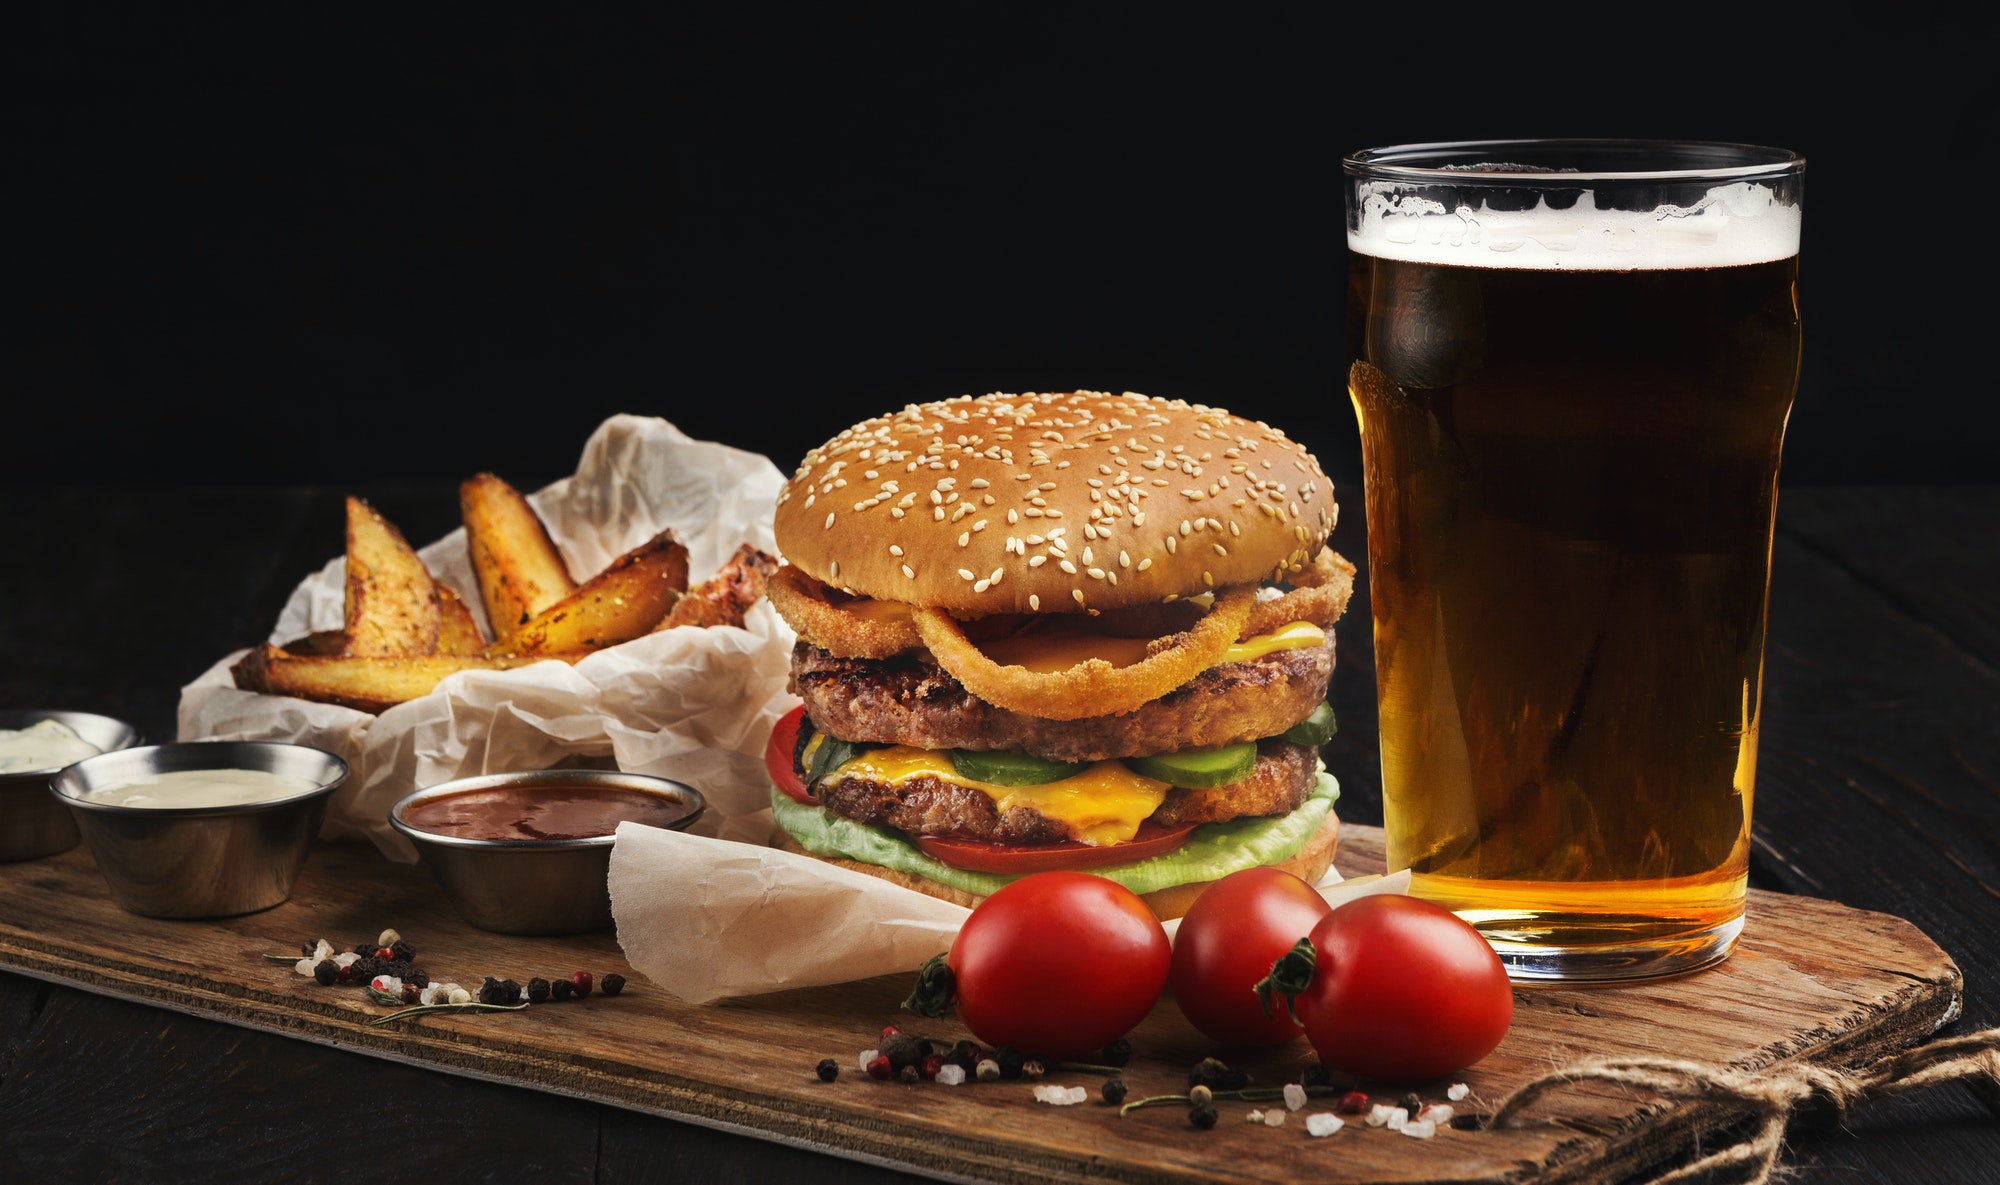 Hamburger made of beef and beer on wooden cutting board